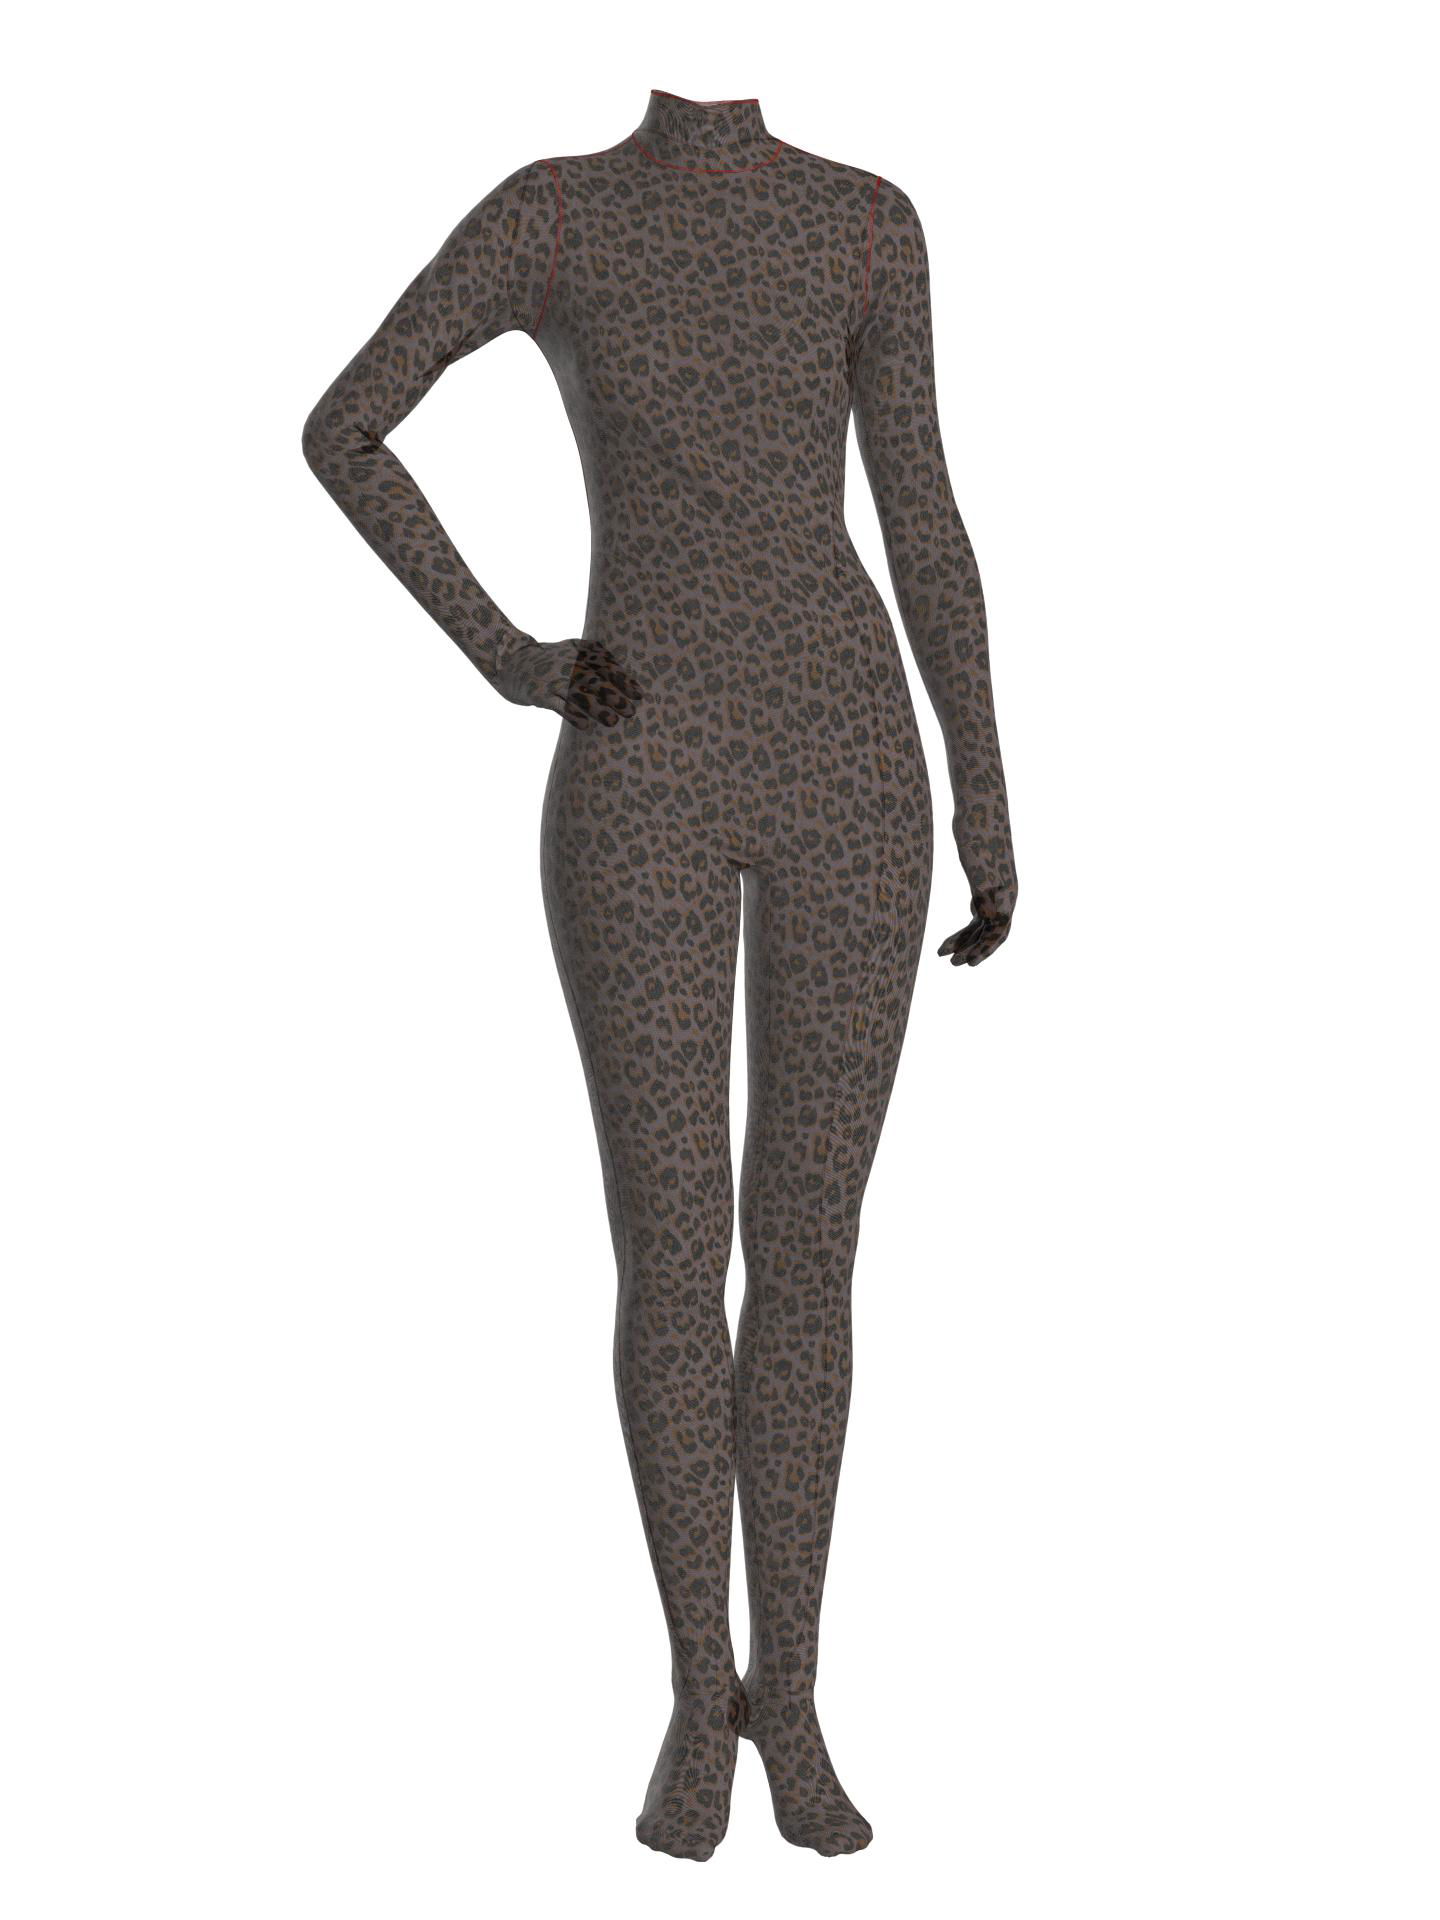 Leopard Print Catsuit by LOOPHOLE DIGITAL FASHION